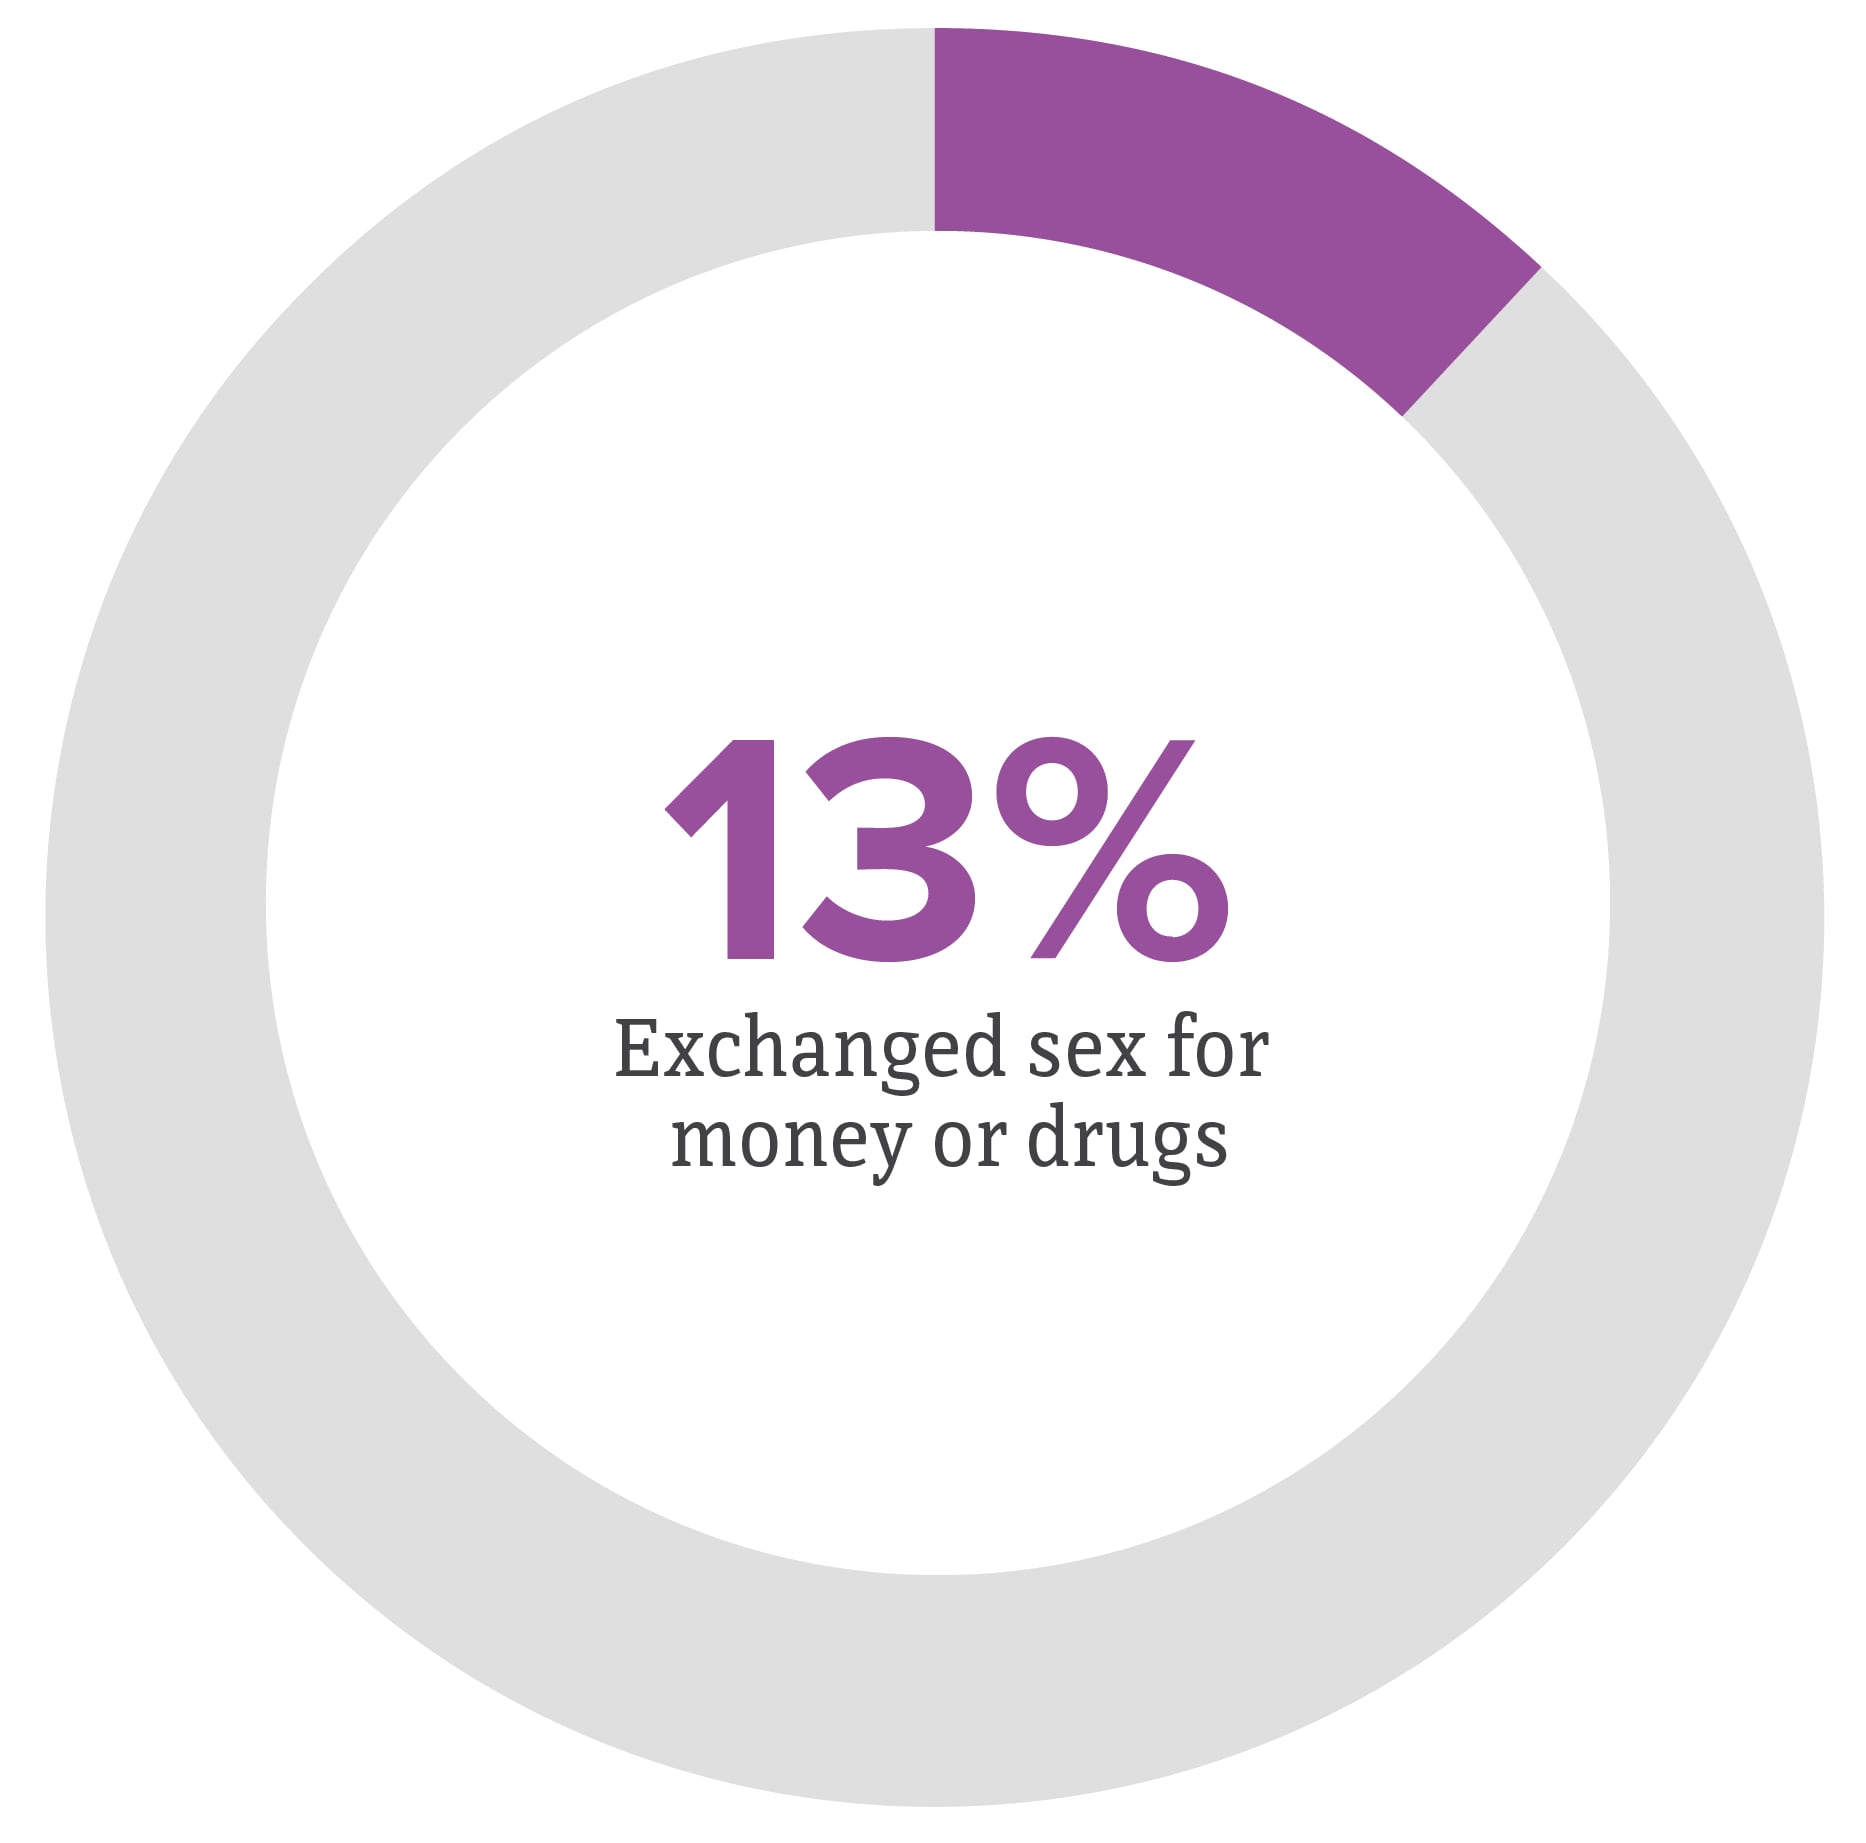 Pie chart showing that 13% of men who have sex with men exchanged sex for money or drugs.